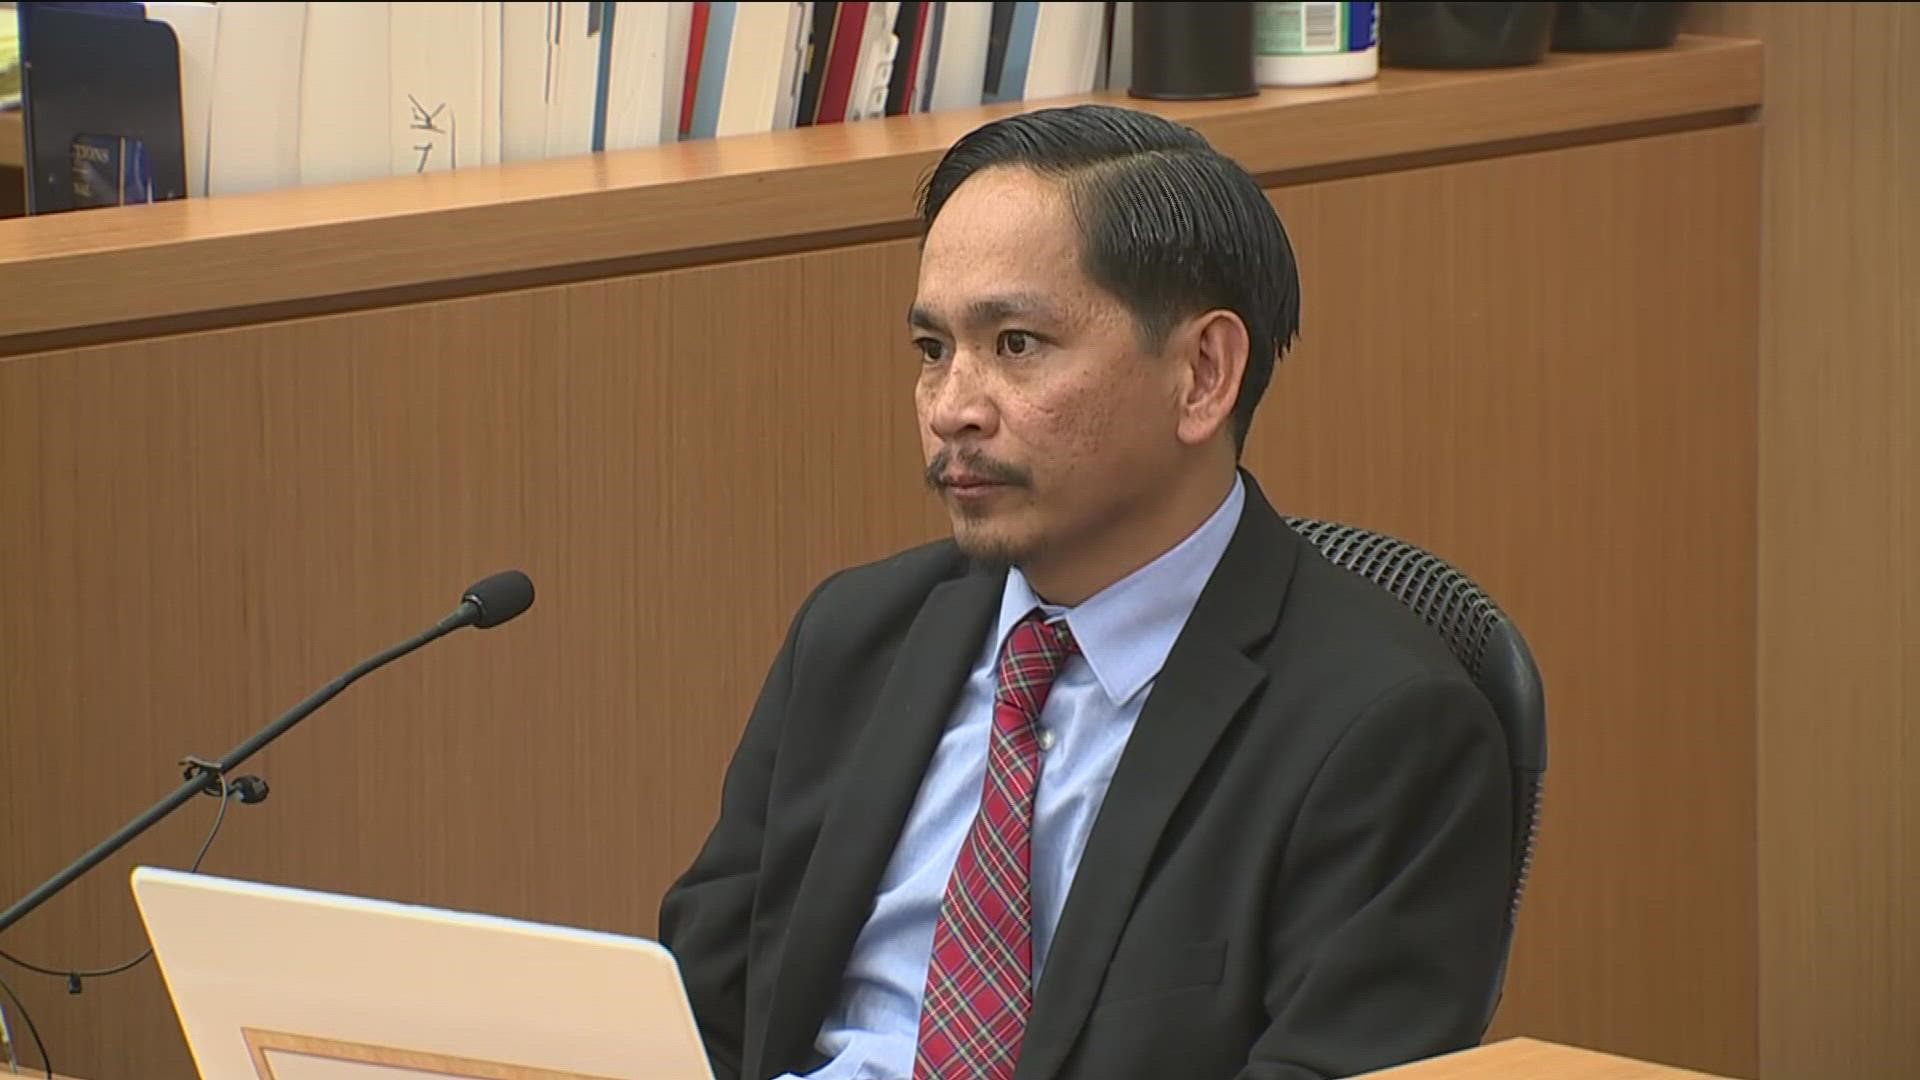 Cross-examination continued of Maya's sister in the morning and one of her brothers took the stand just before noon.